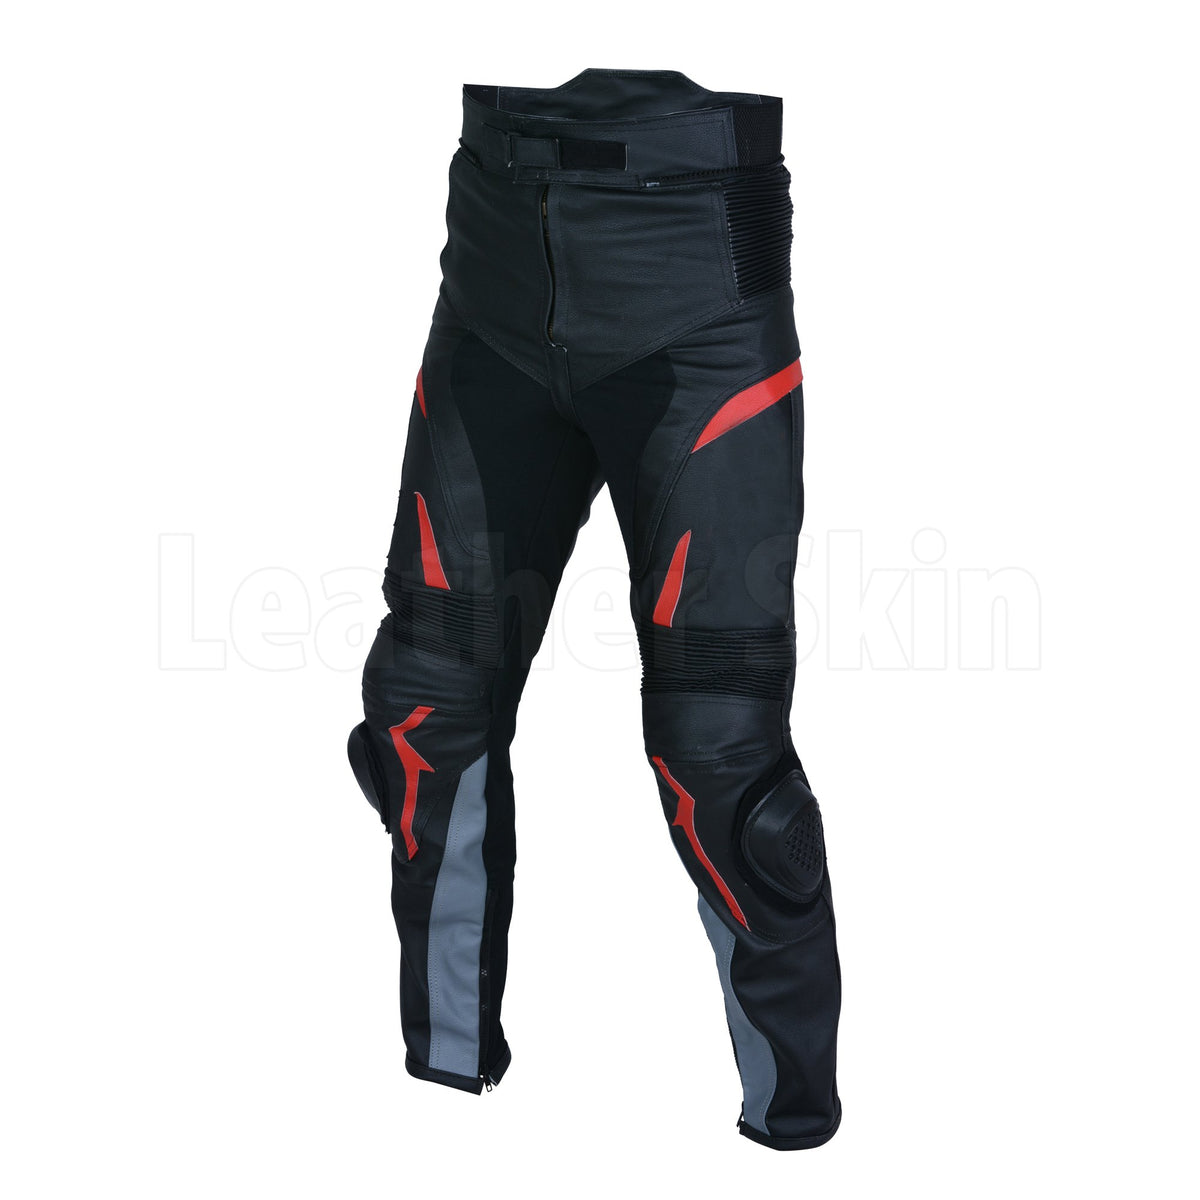 Malle Motorcycle Trousers - Malle London